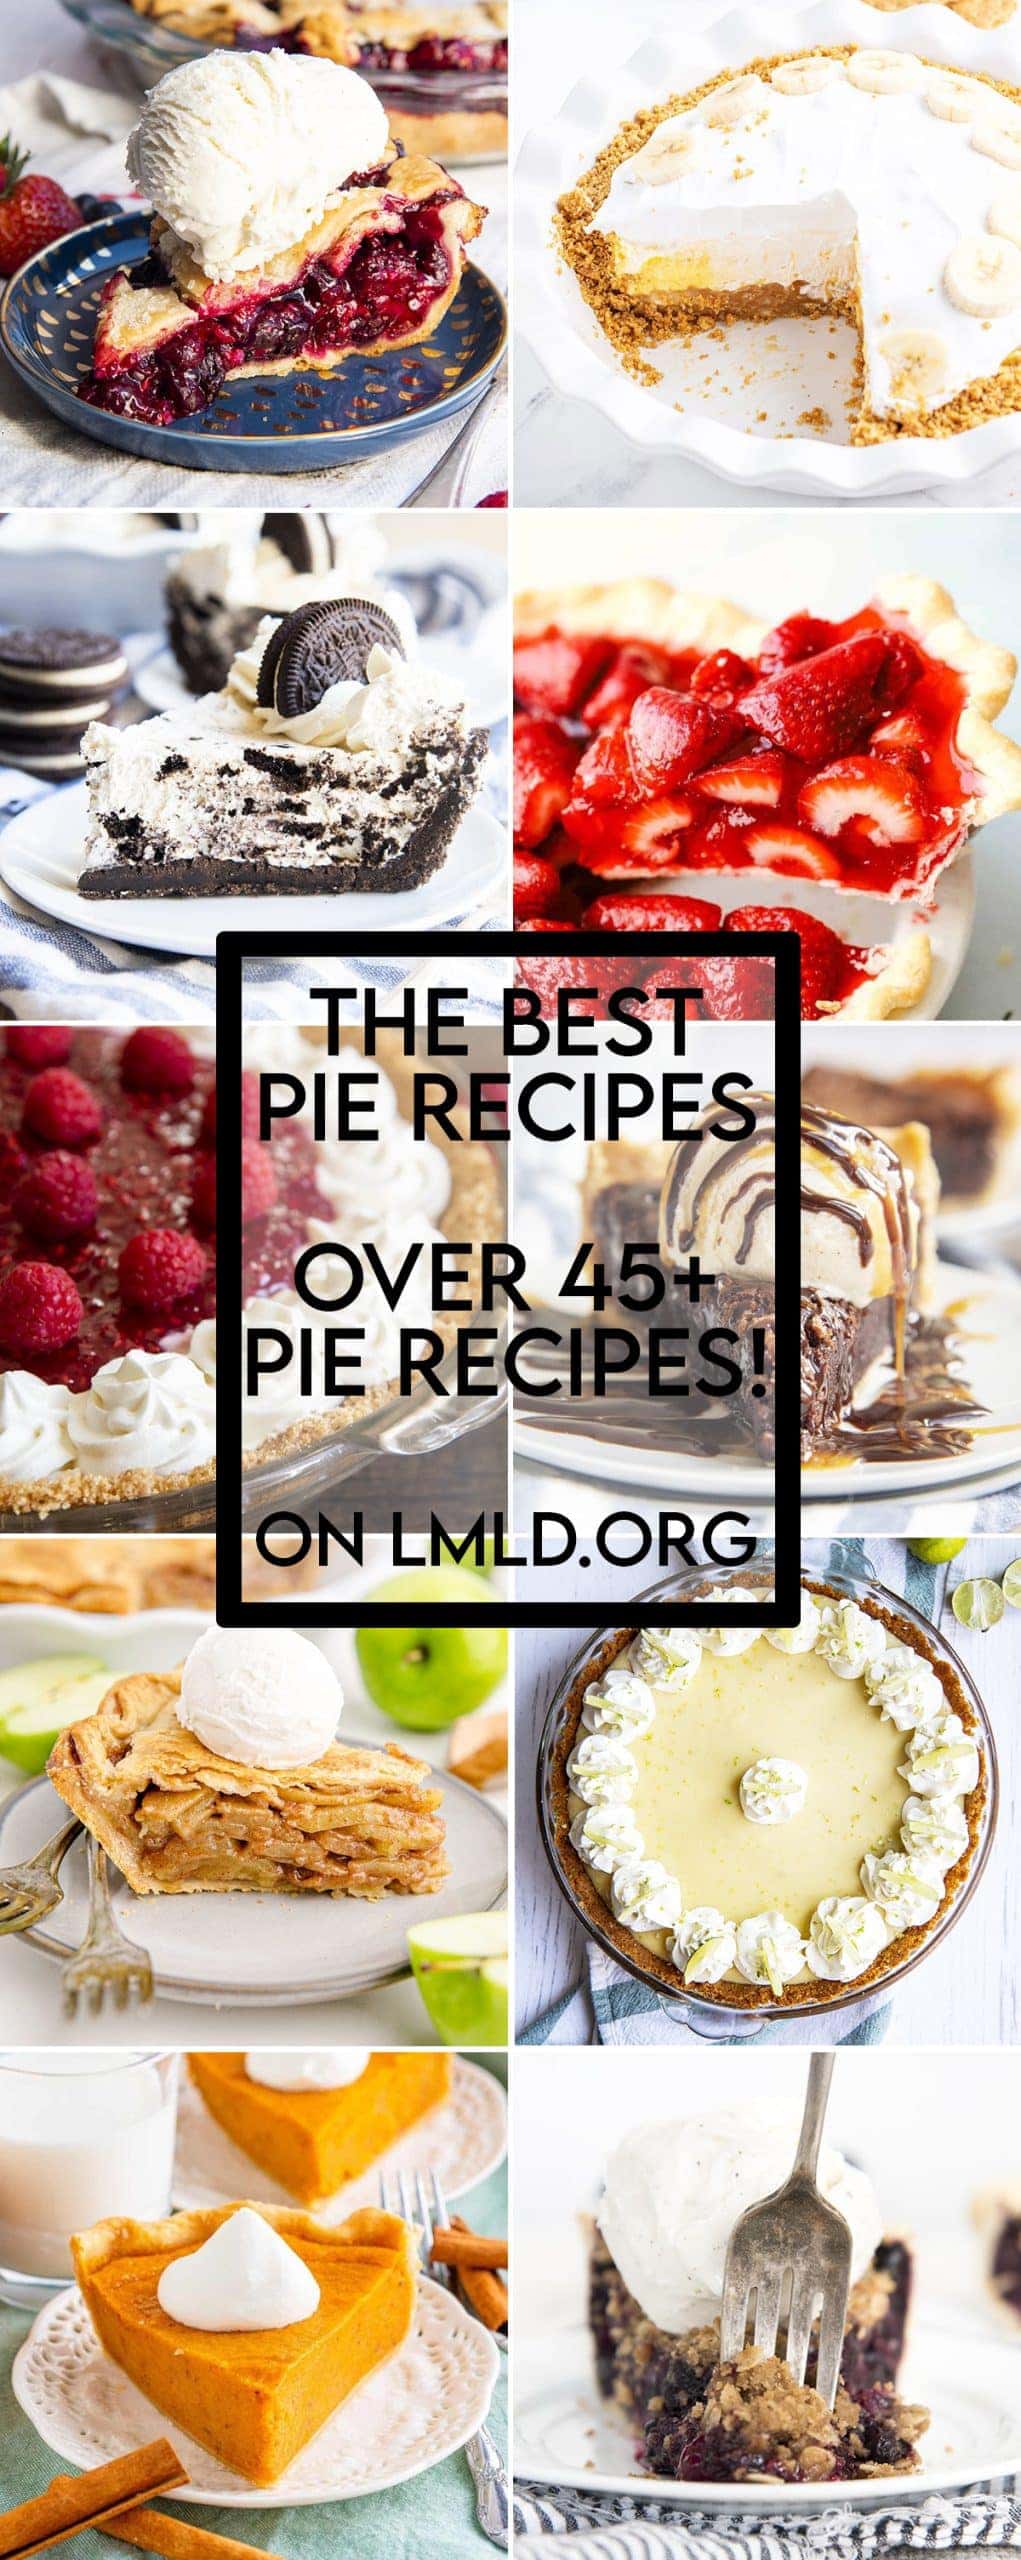 A collage of 10 different pictures of pies with a text overlay saying "The best Pie Recipes Over 45 Pie Recipes On LMLD.org"